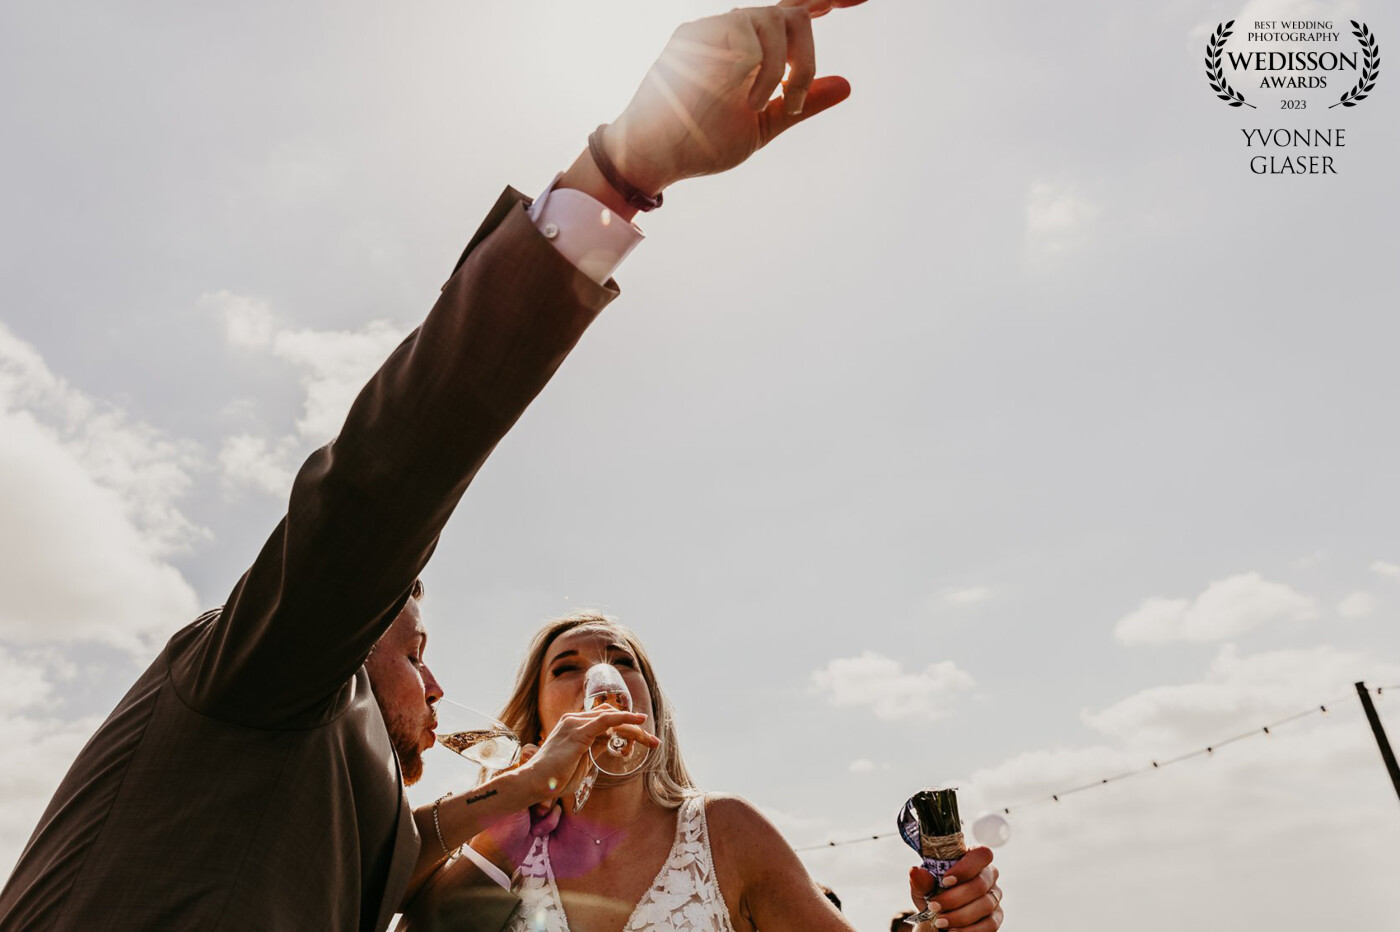 After their ceremony, full of euphoria, they toast to the beautiful life that lies ahead of them.